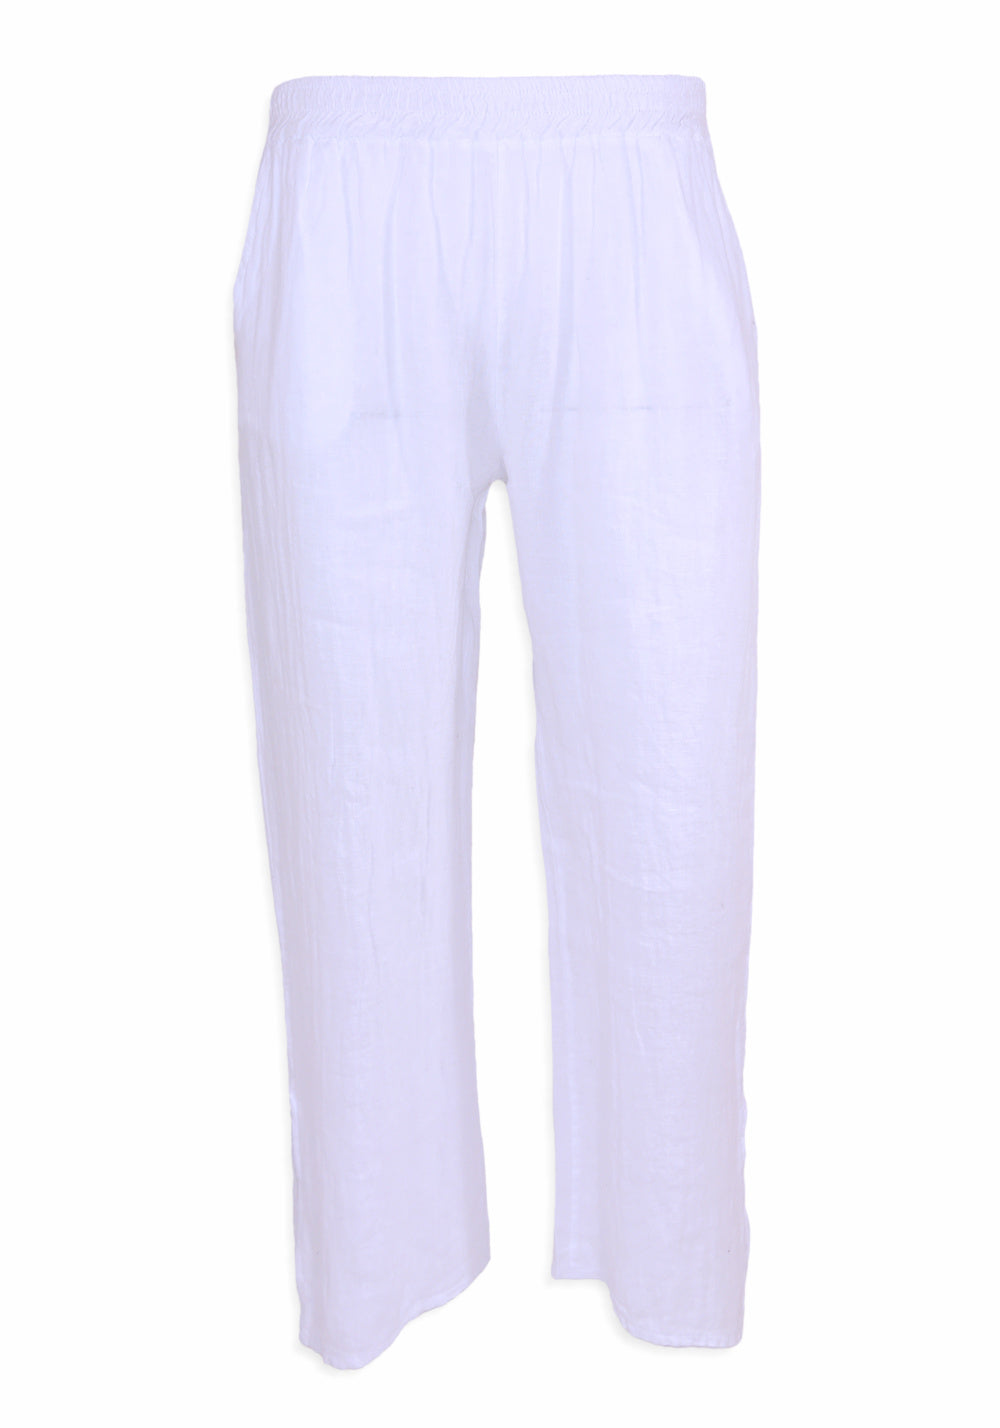 LINEN LOUNGE PANTS WITH SIDE SLITS (WHITE) - PISTACHE